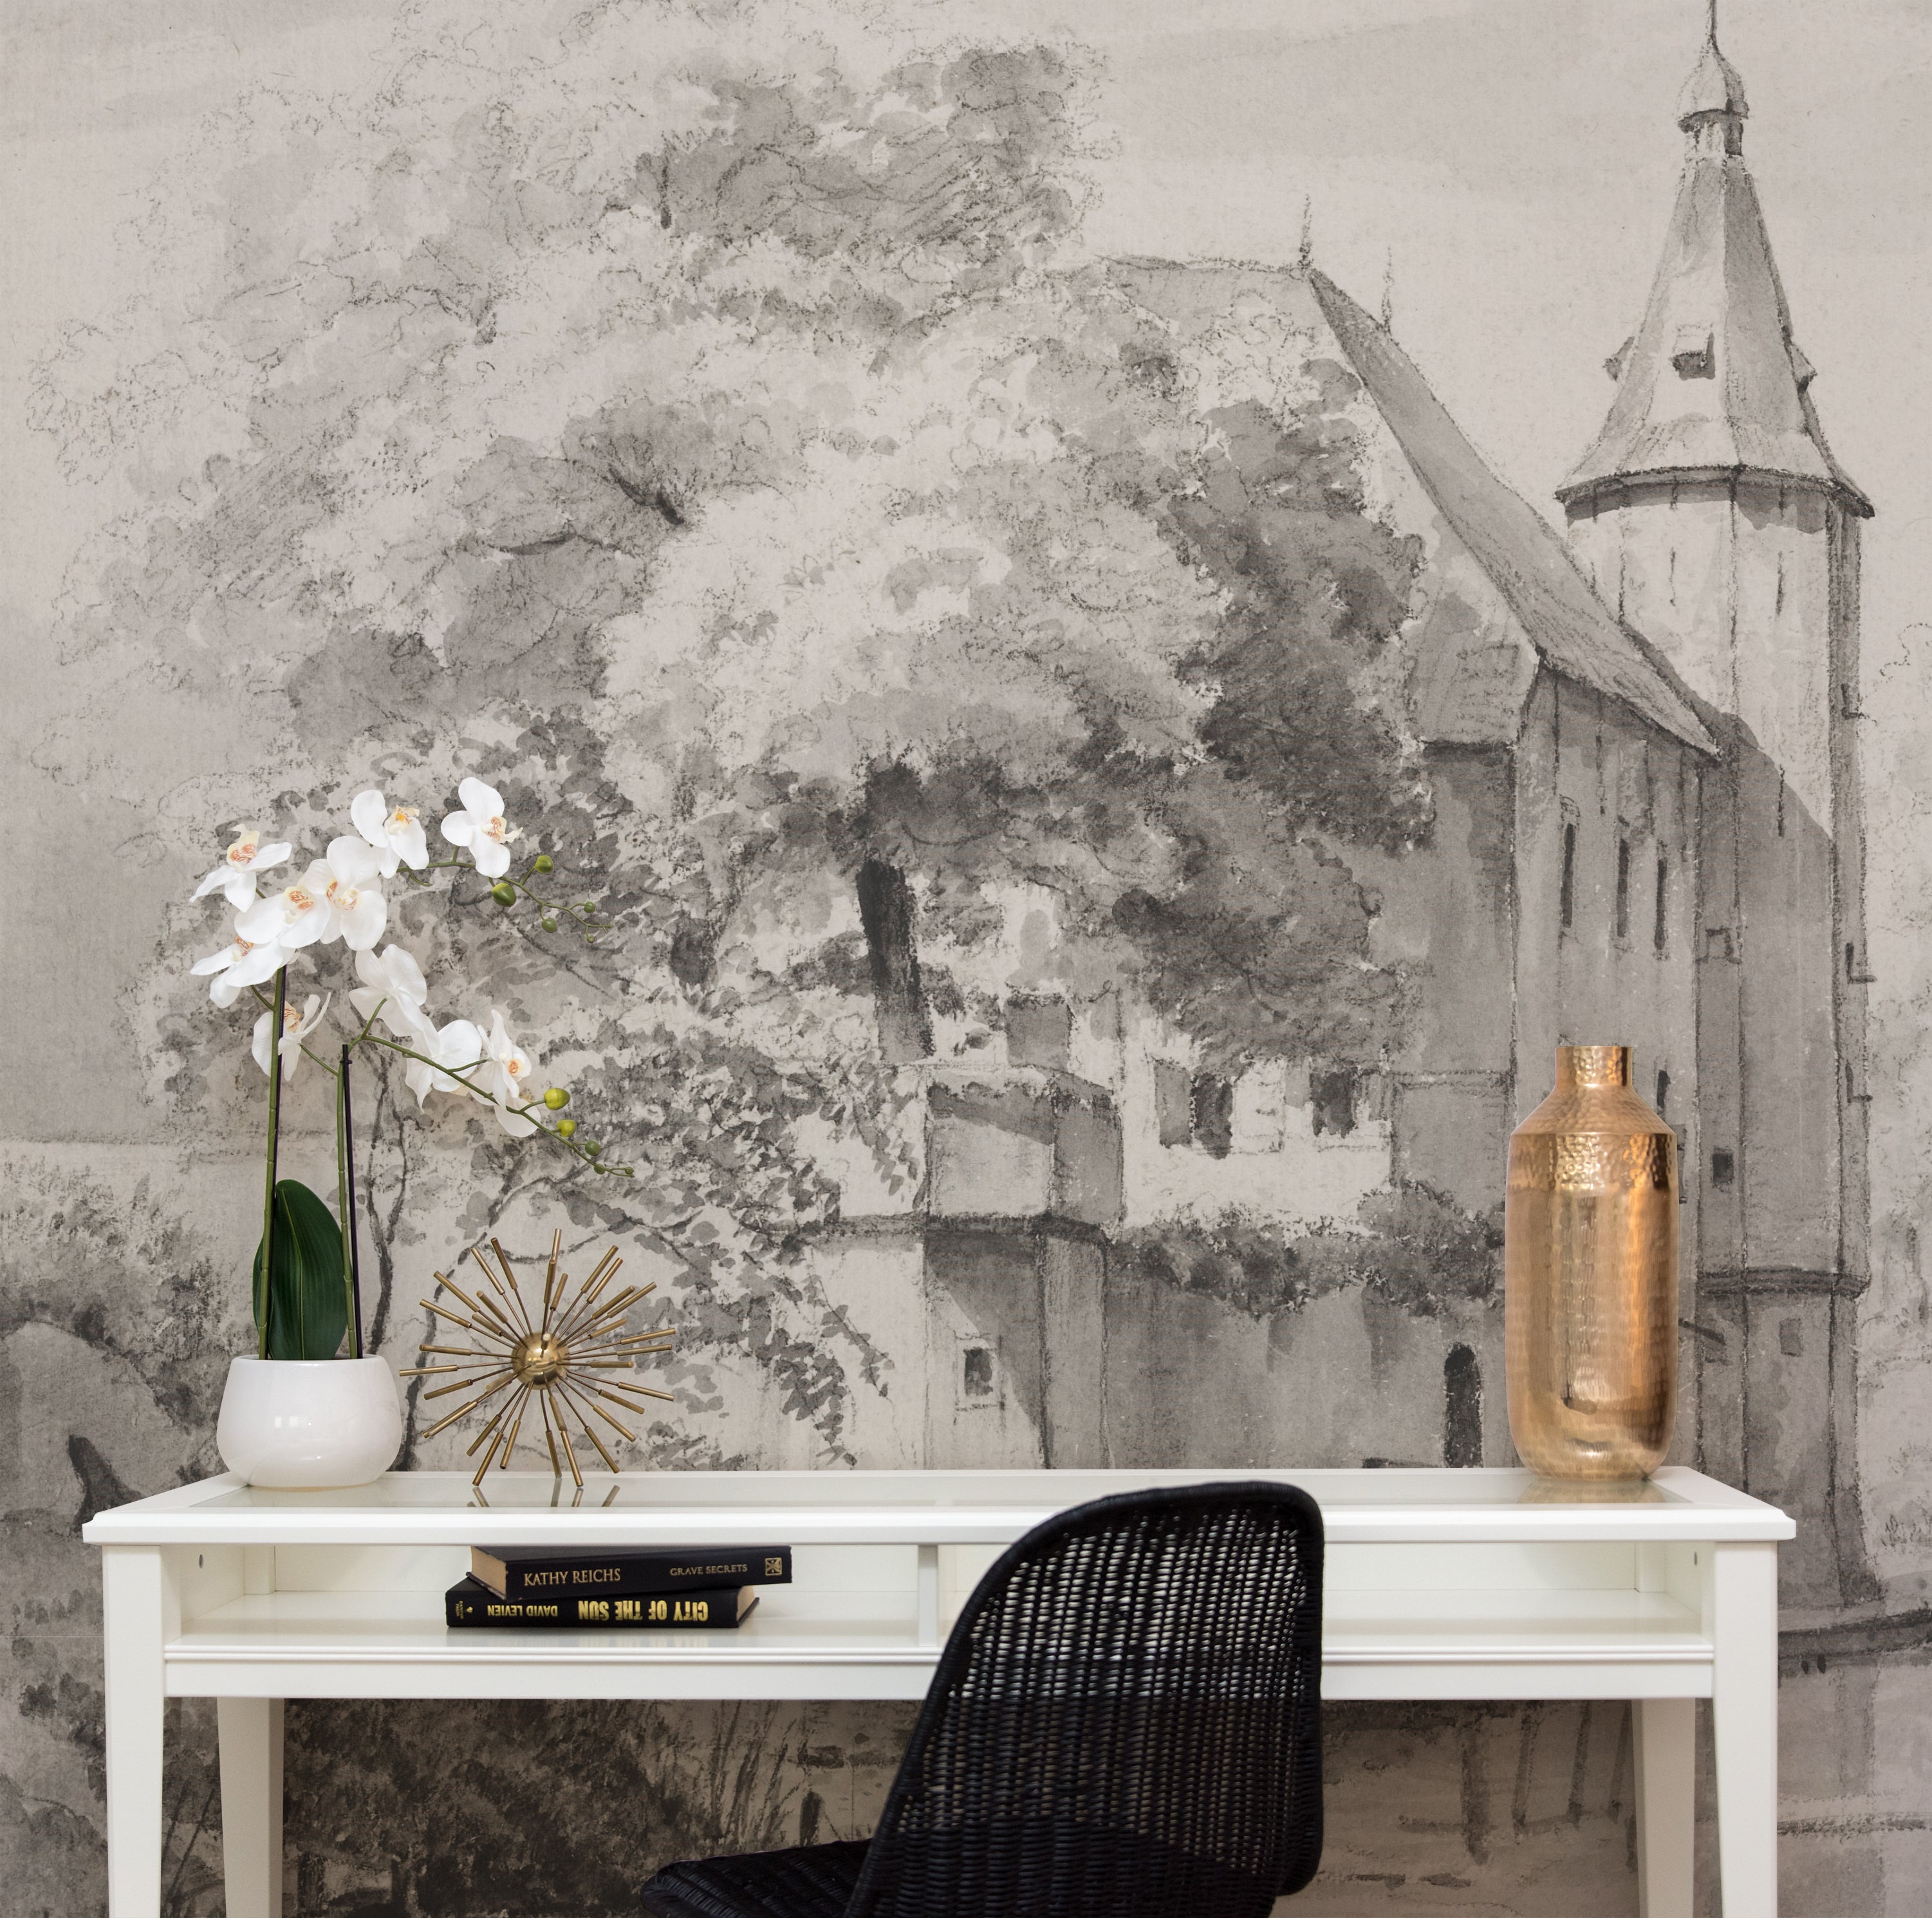 Sophisticated office space featuring the 'Kasteel Soelen - Wall Mural Wallpaper'. The intricate castle depiction in muted grey tones provides a tranquil and inspiring backdrop for creative work